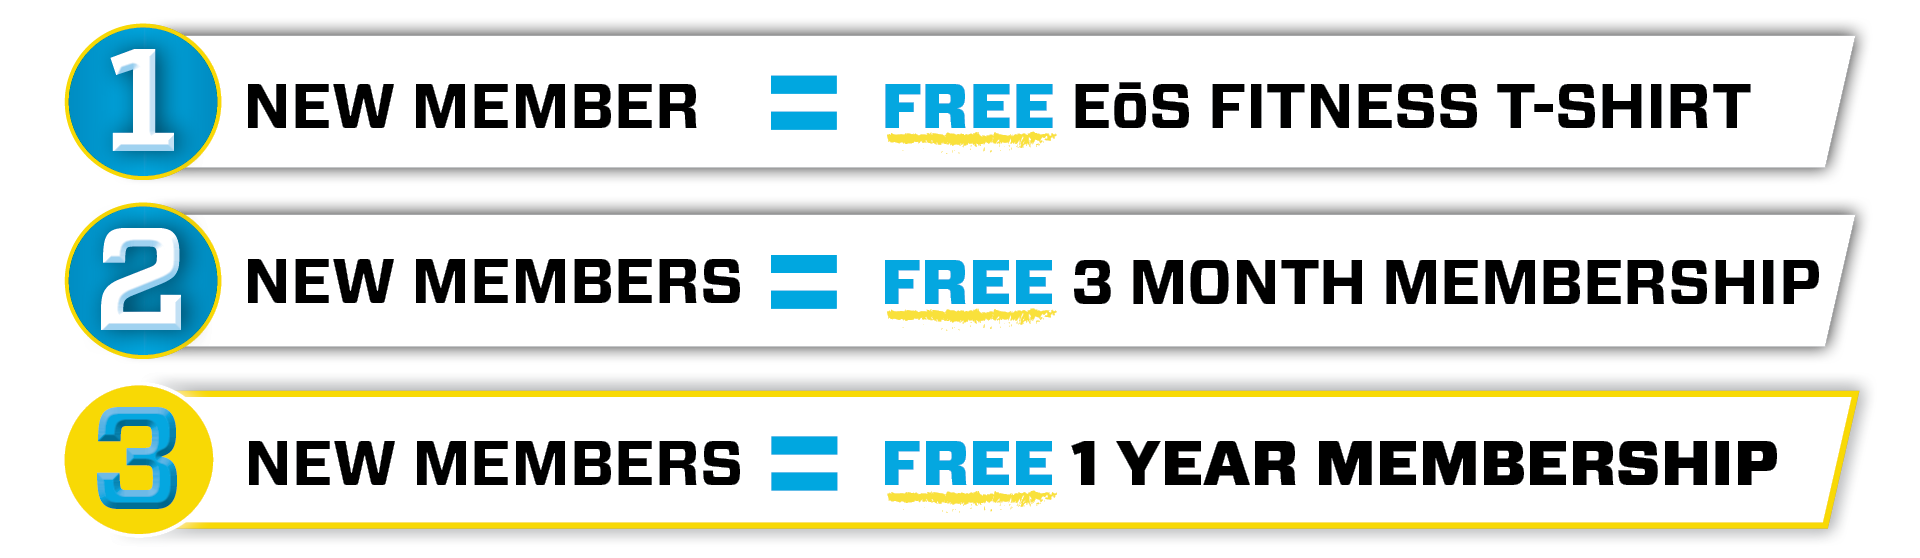 1 New Member = Free EoS Fitness T-Shirt; 2 New Members = Free 3 Month Membership; 3 New Members = Free 1 Year Membership